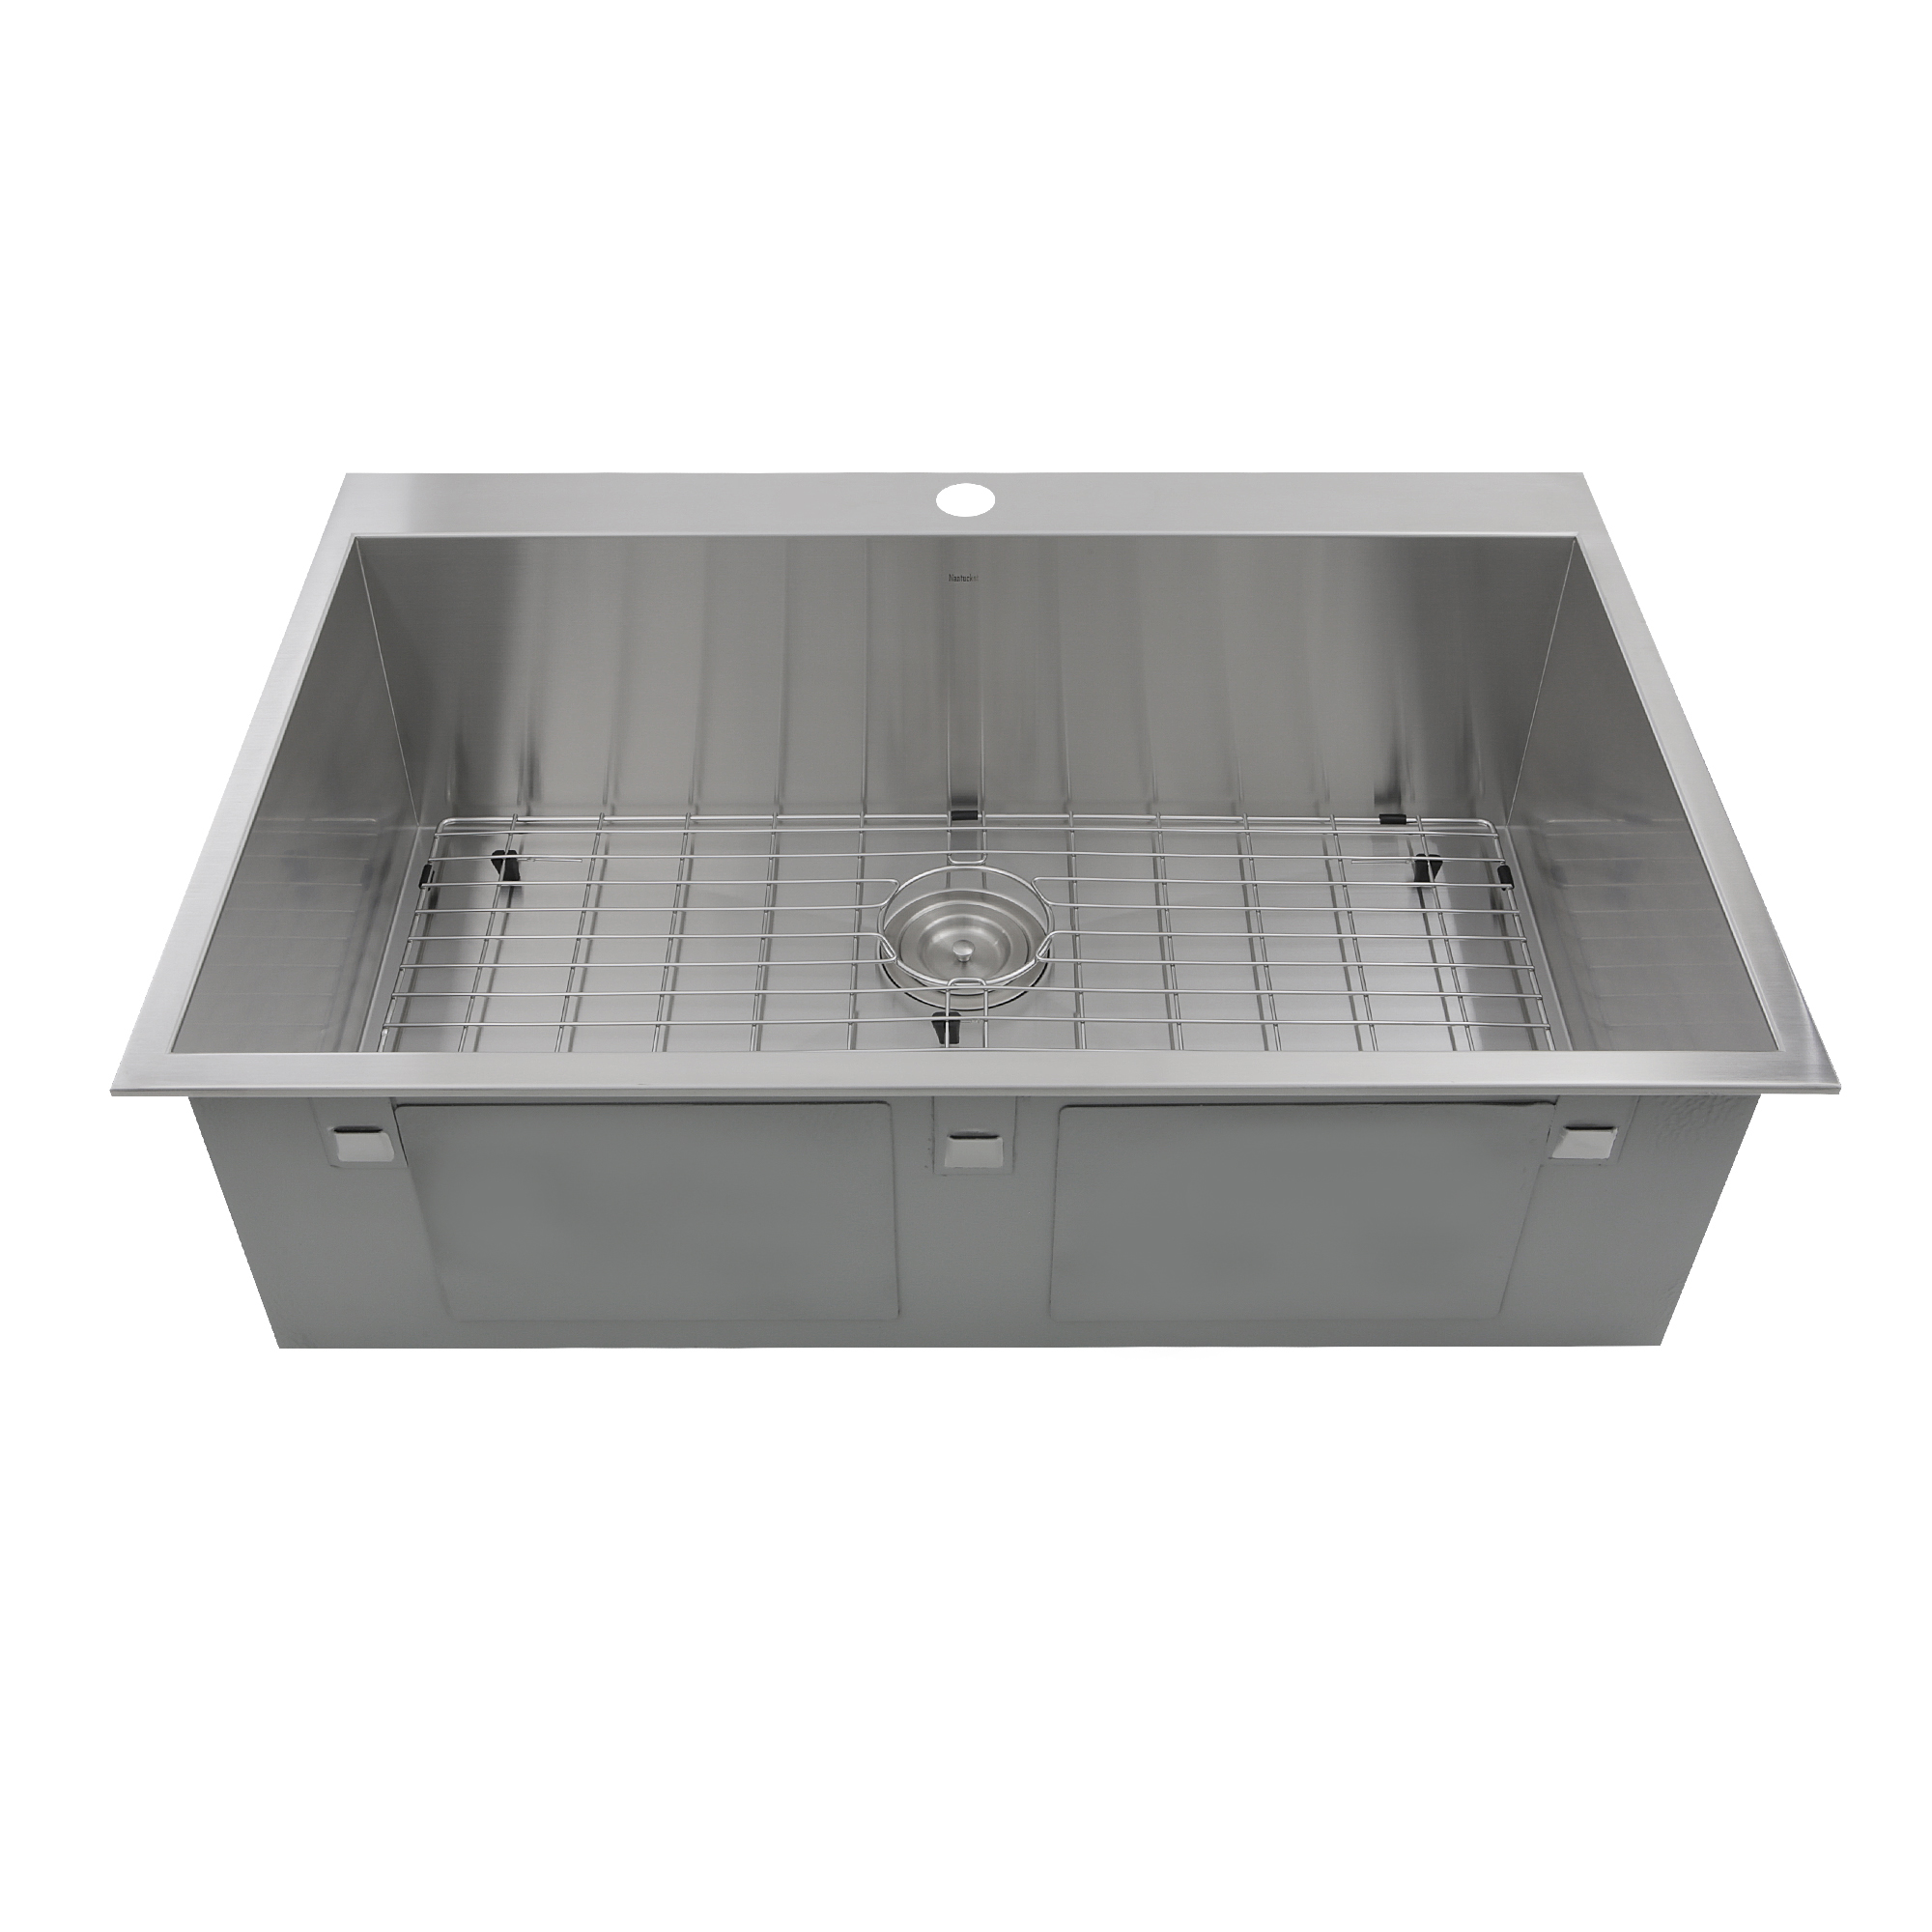 Nantucket Sinks ZR3322-S-16 Self Rimming Stainless Steel Kitchen Sink - image 5 of 7